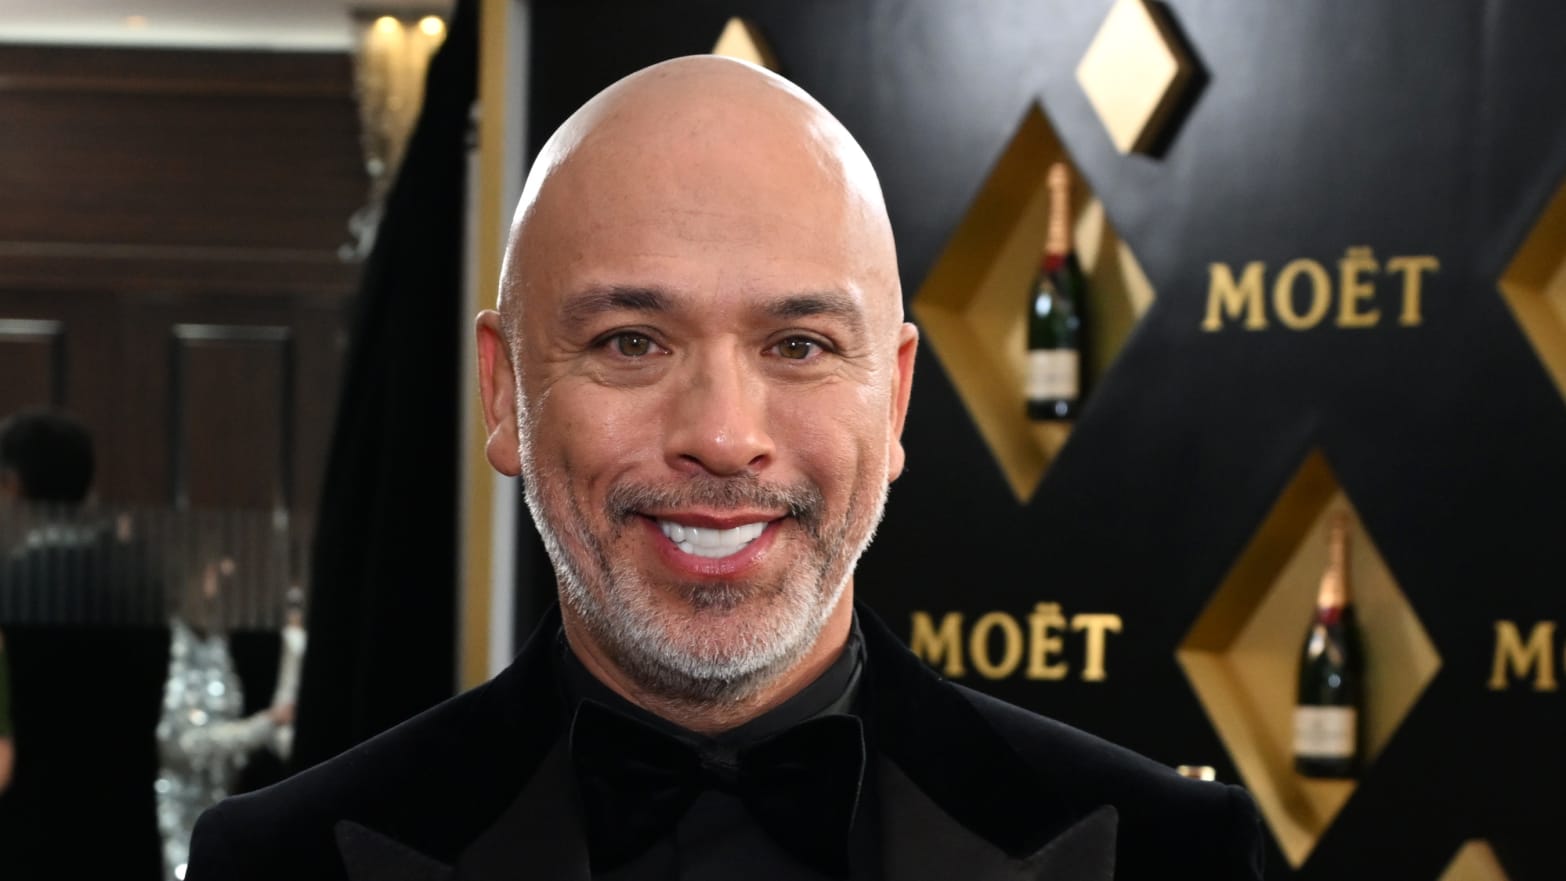 Jo Koy Goes on Apology Tour to Clean Up Golden Globes Disaster